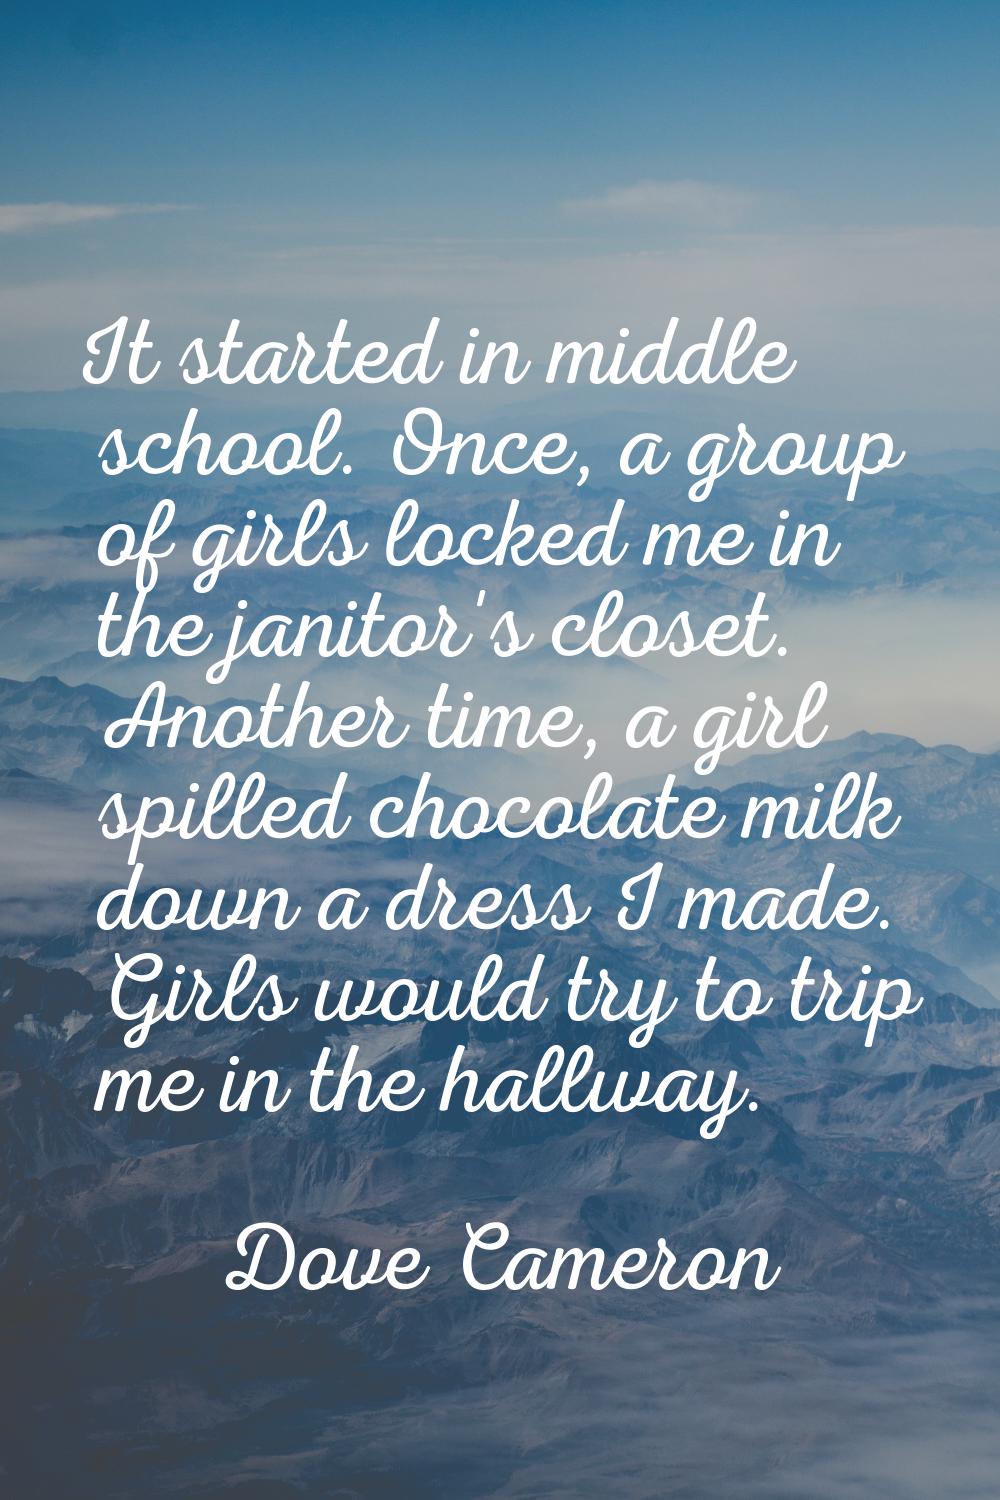 It started in middle school. Once, a group of girls locked me in the janitor's closet. Another time